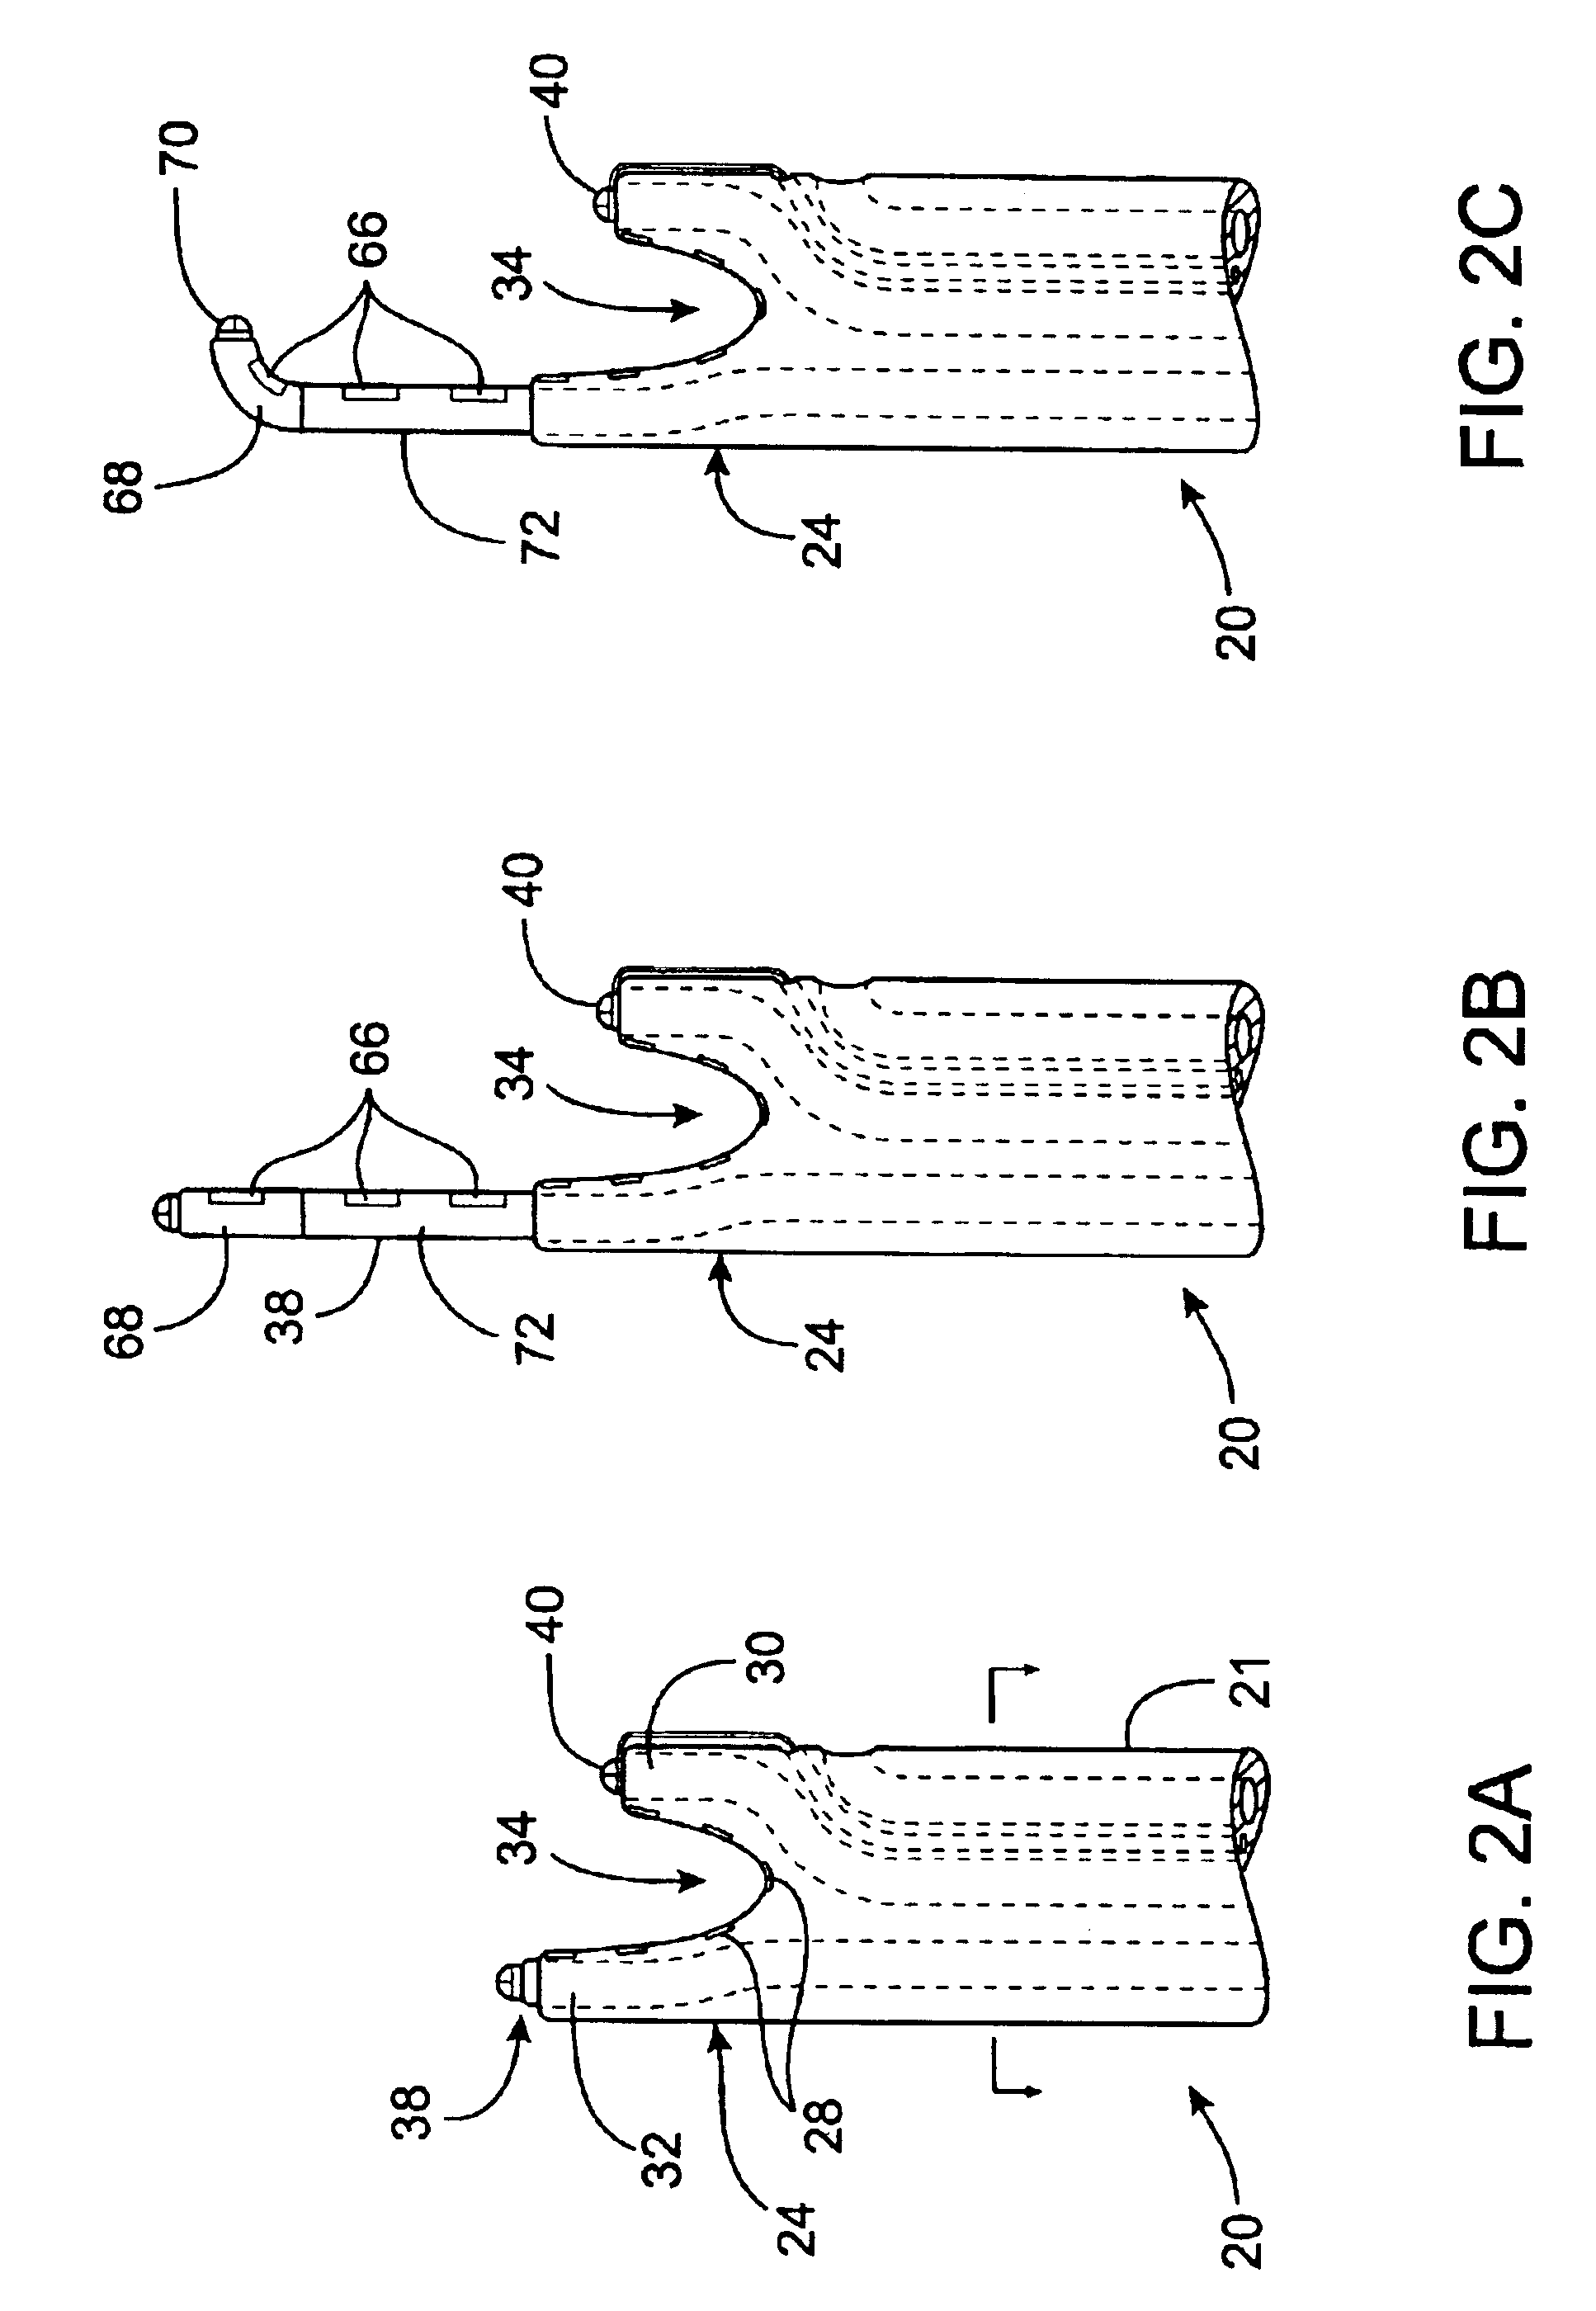 Apparatus and method for diagnosis and therapy of electrophysiological disease